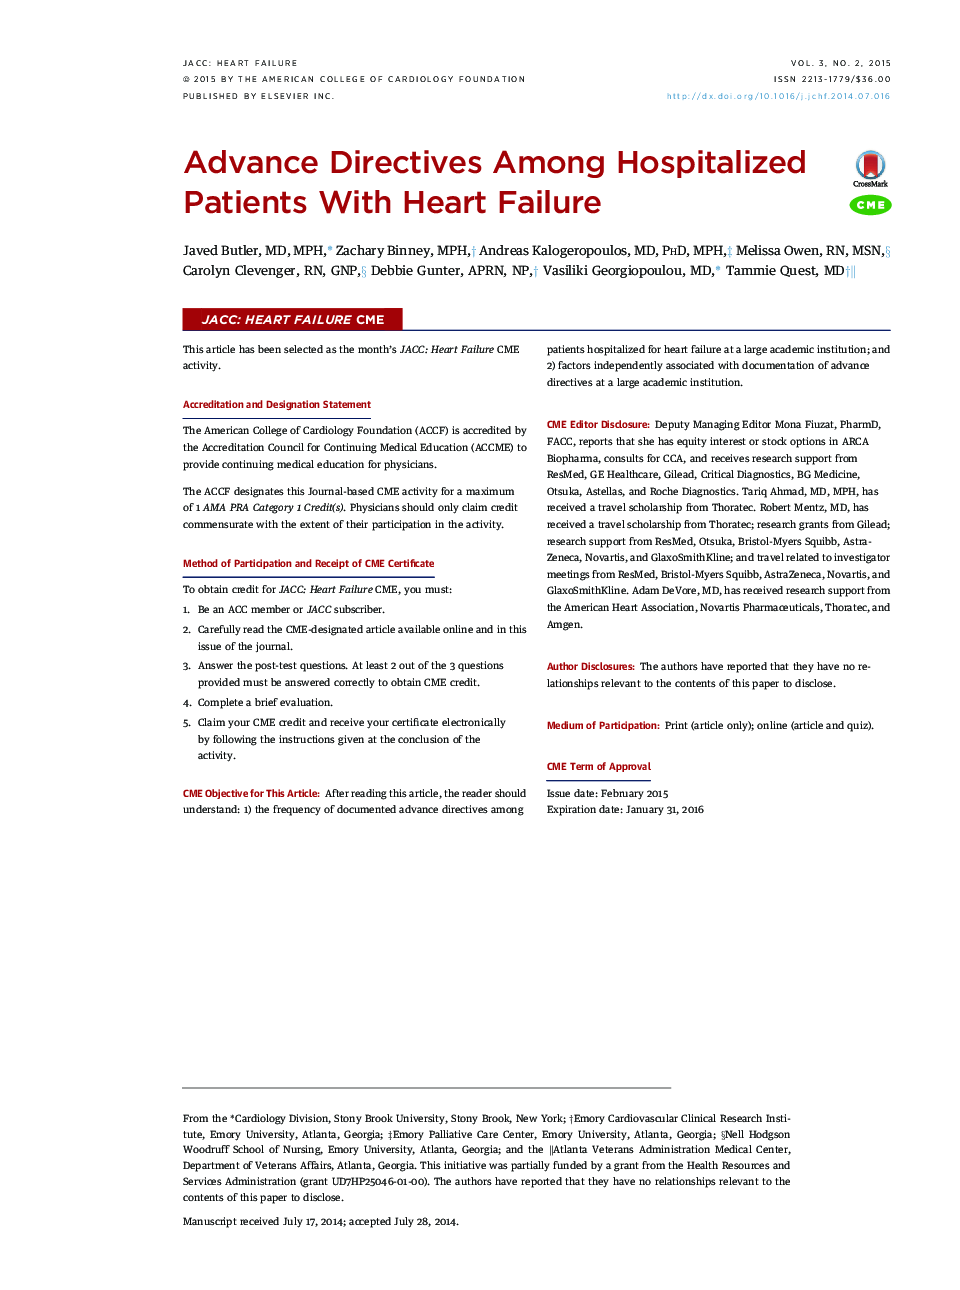 Advance Directives Among Hospitalized Patients With Heart Failure 